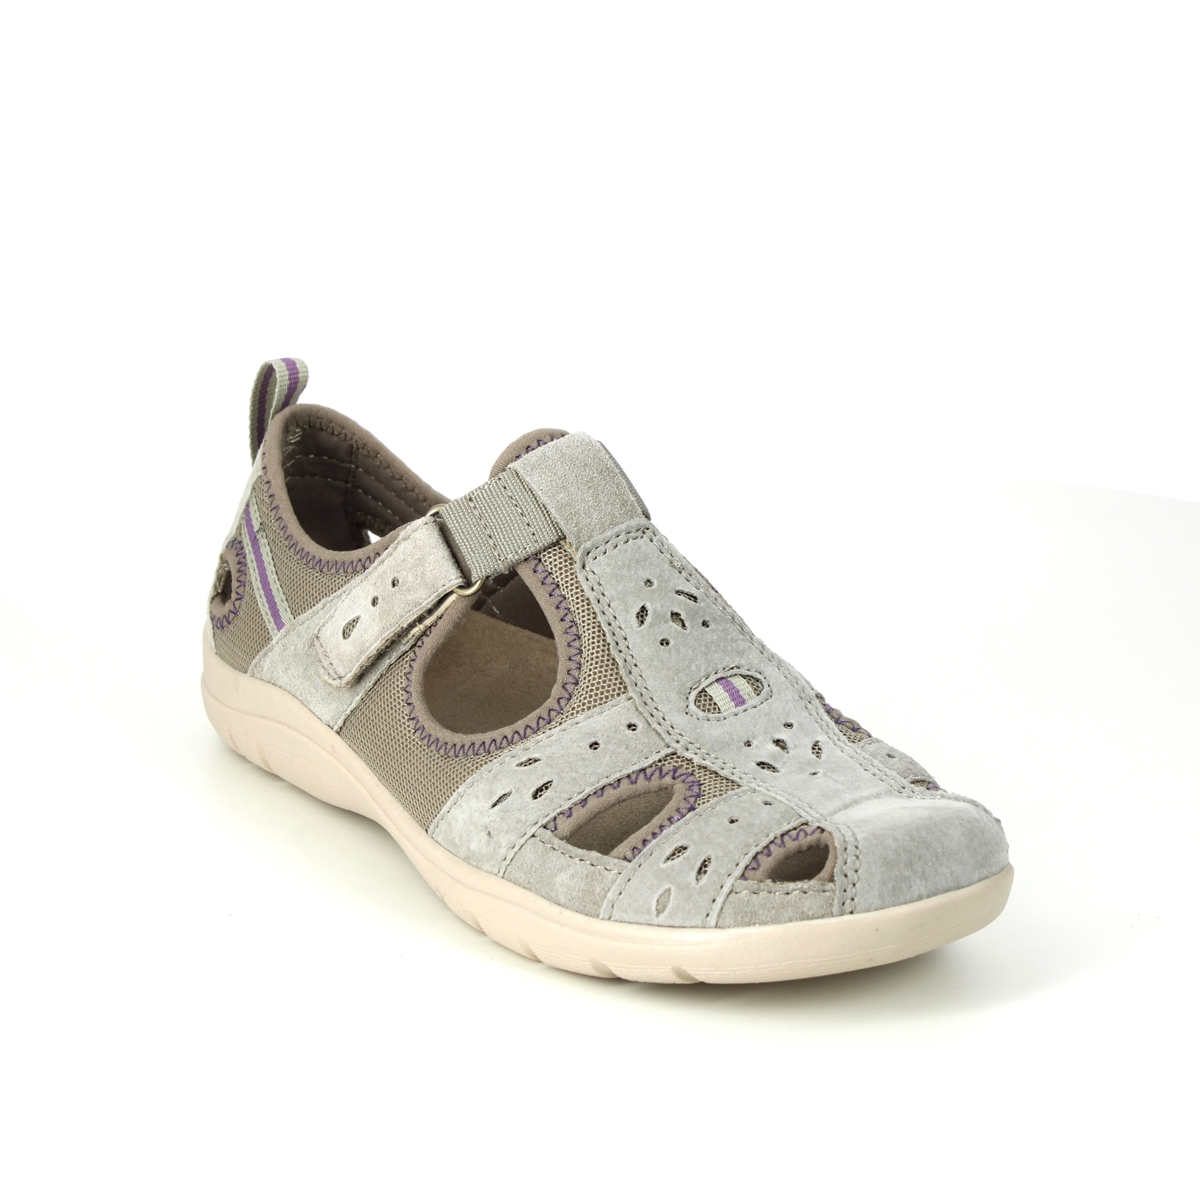 Earth Spirit Cleveland 01 Taupe Suede Womens Closed Toe Sandals 30324-50 In Size 9 In Plain Taupe Suede